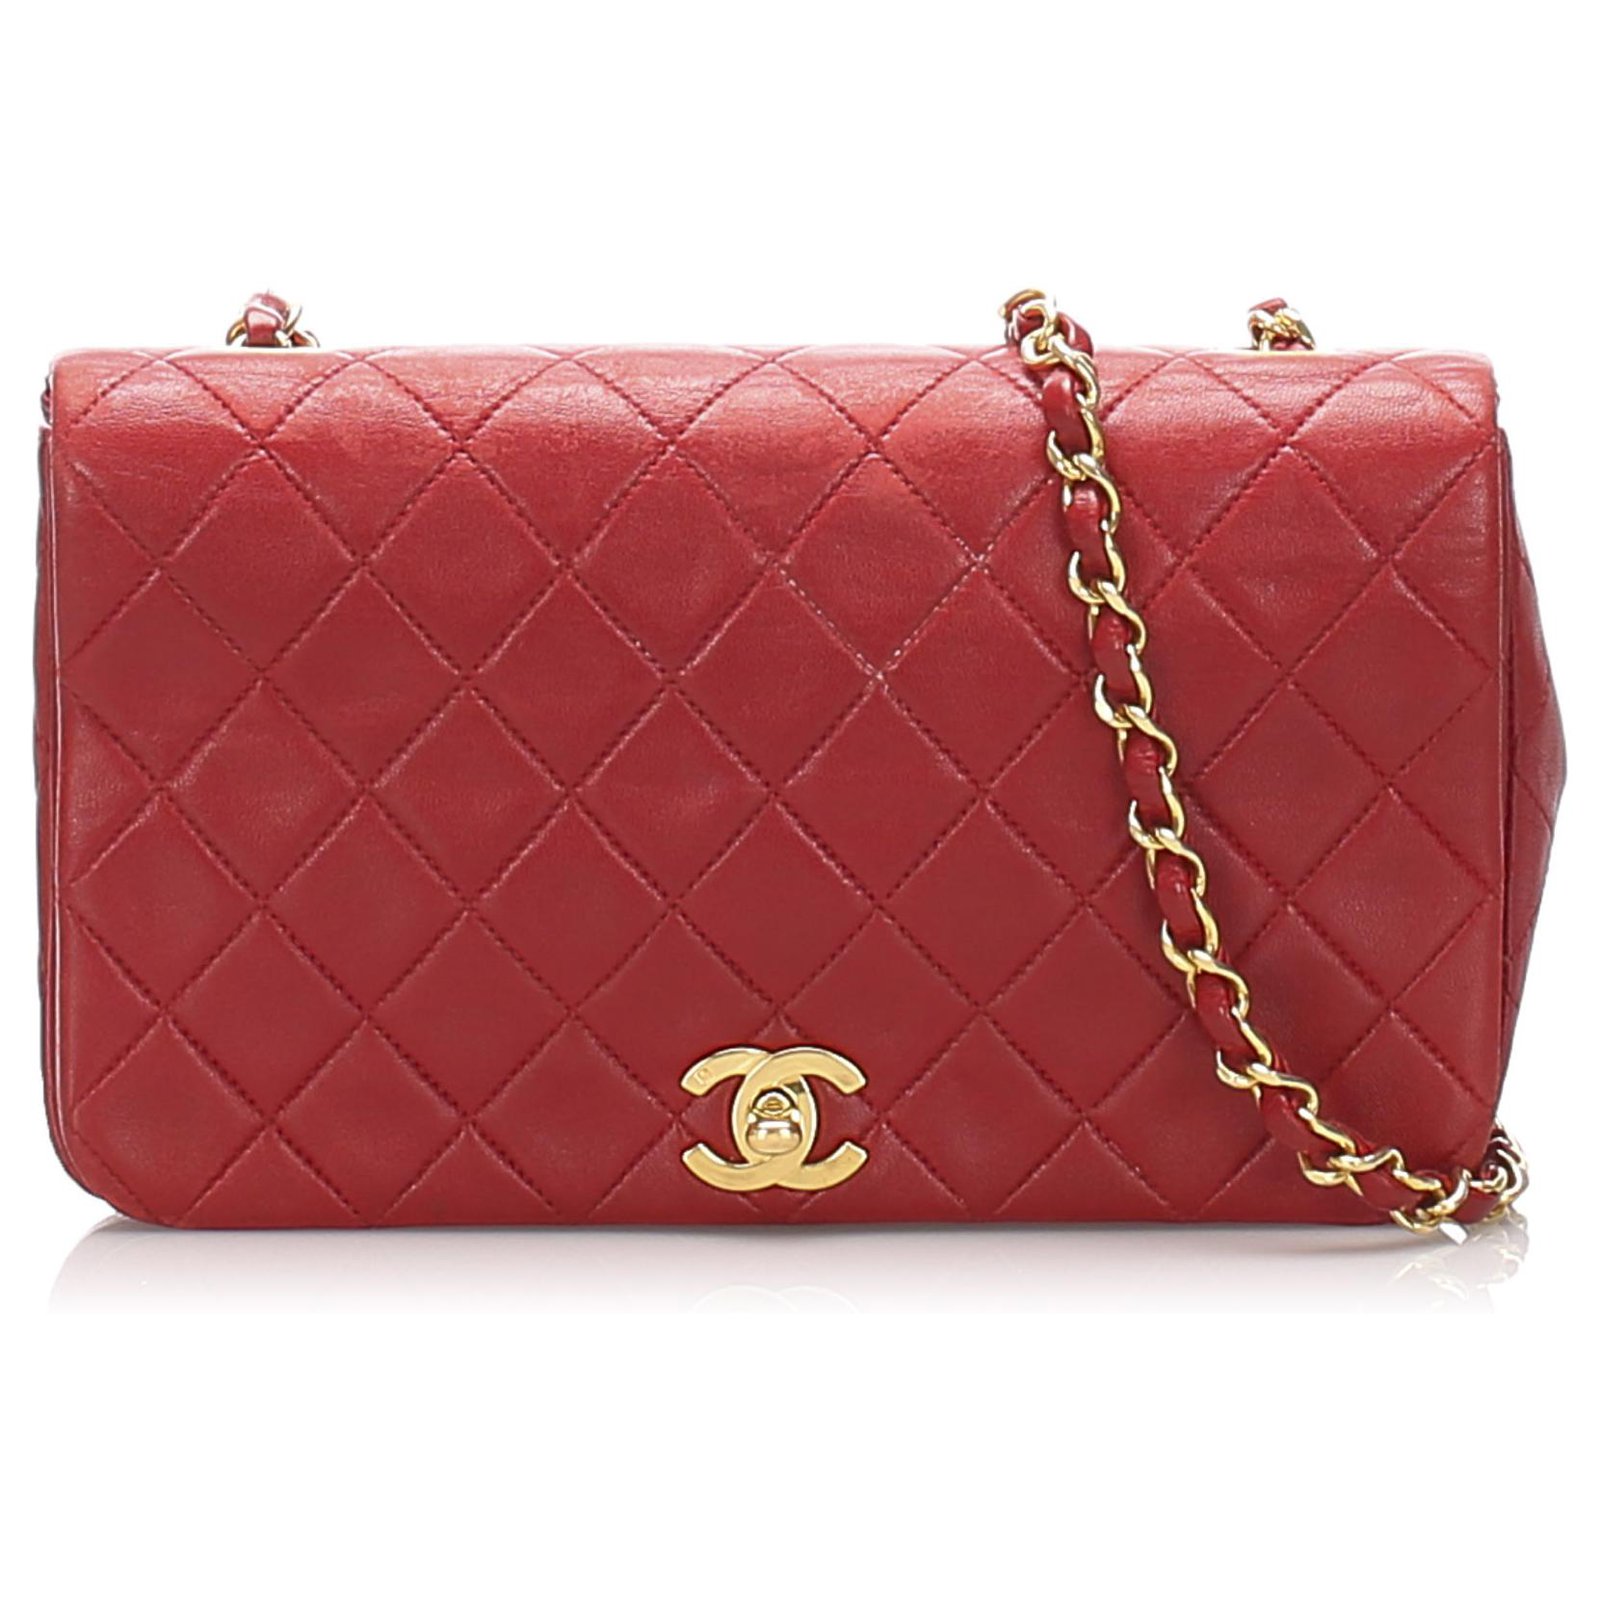 Chanel Red CC Timeless Leather Crossbody Bag